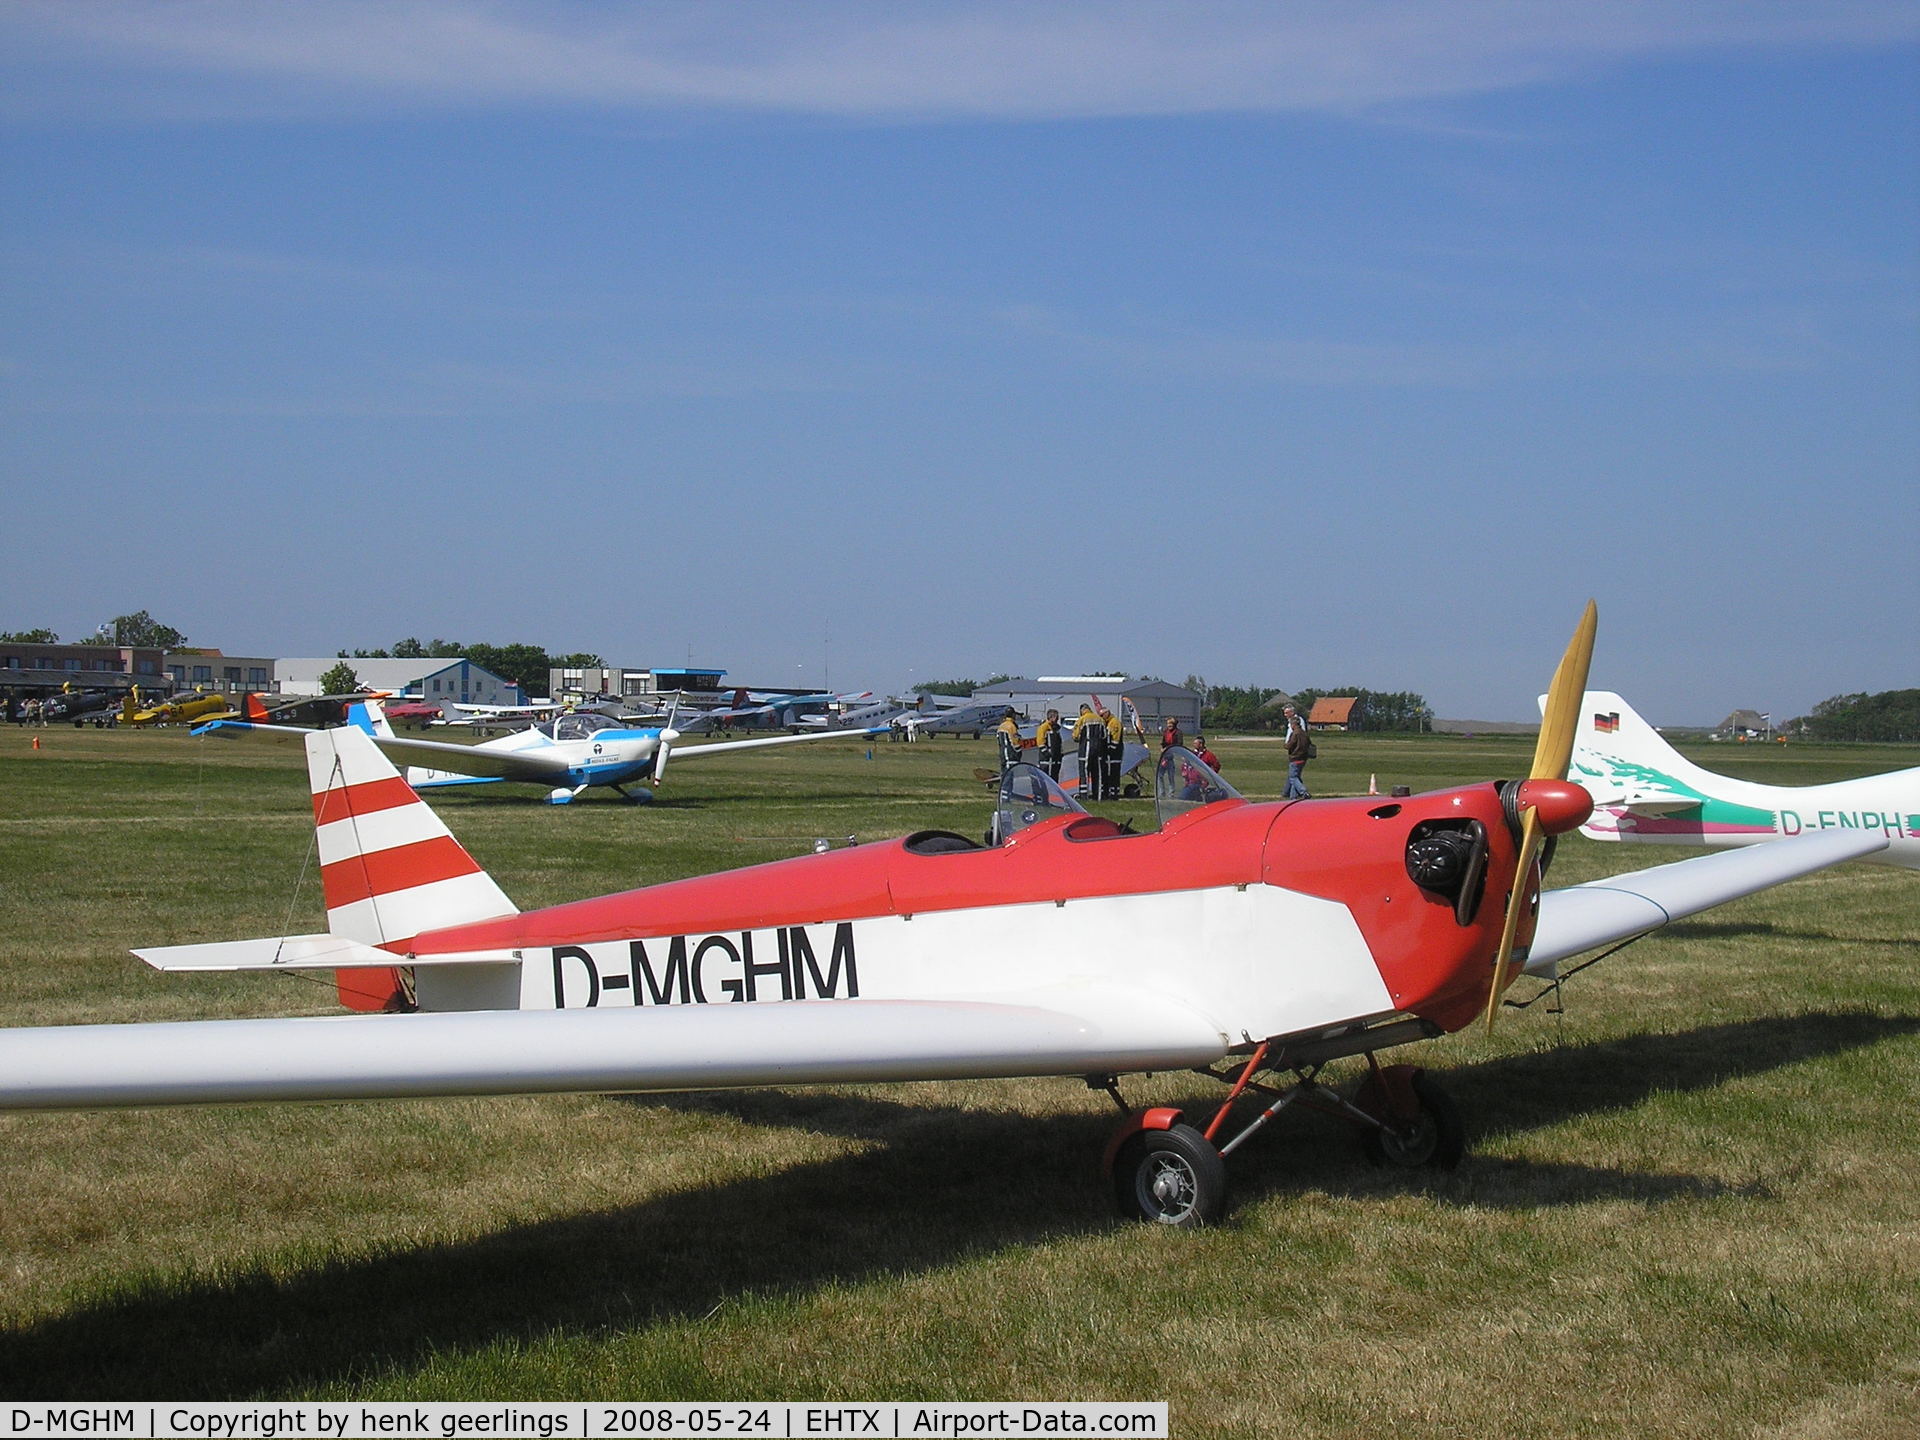 D-MGHM, 2000 WDFL Dallach Sunrise II C/N Not found D-MGHM, Texel Taildragger & Old Timer Fly-In